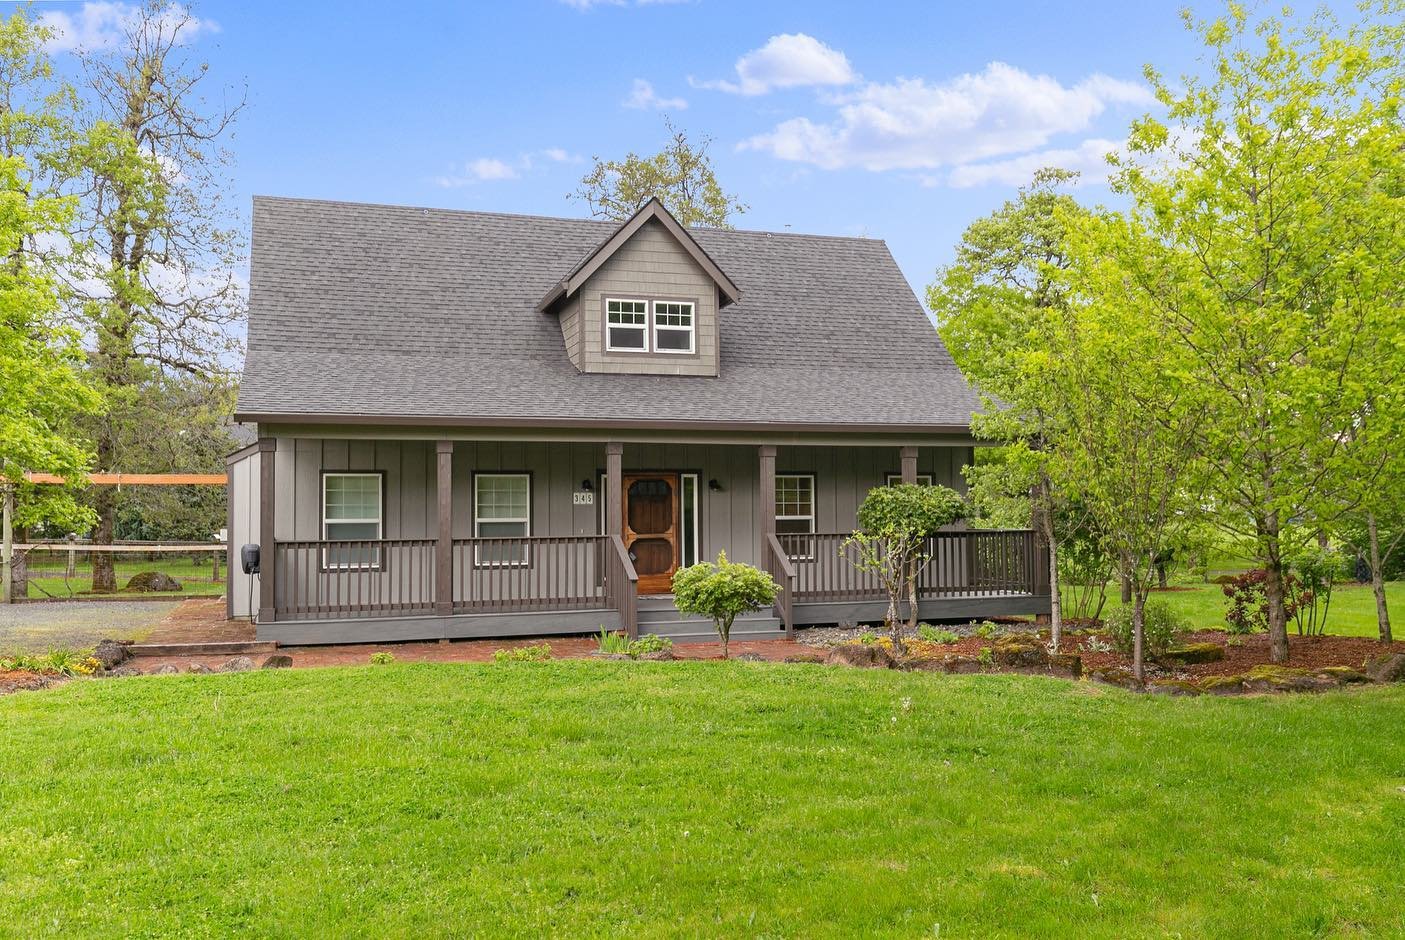 Beautifully updated craftsman home with oversized detached garage nestled in the heart of the Columbia River Gorge. Surrounded by scenic views with miles of walking trails accessible right from the back yard. Lots to see, do, and explore within minut